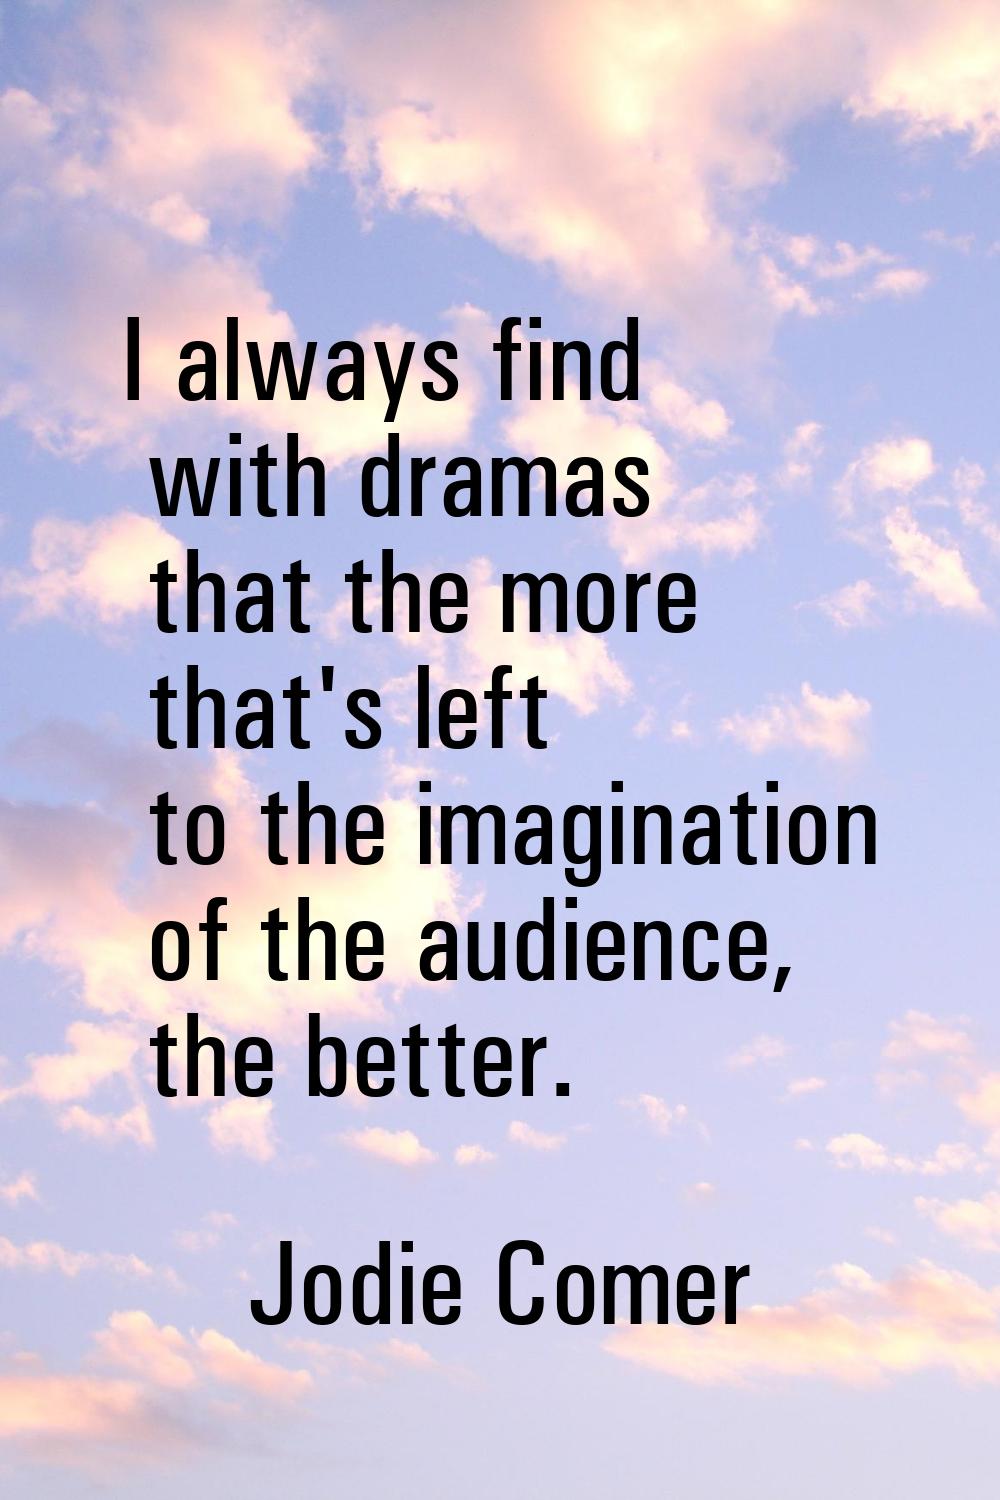 I always find with dramas that the more that's left to the imagination of the audience, the better.